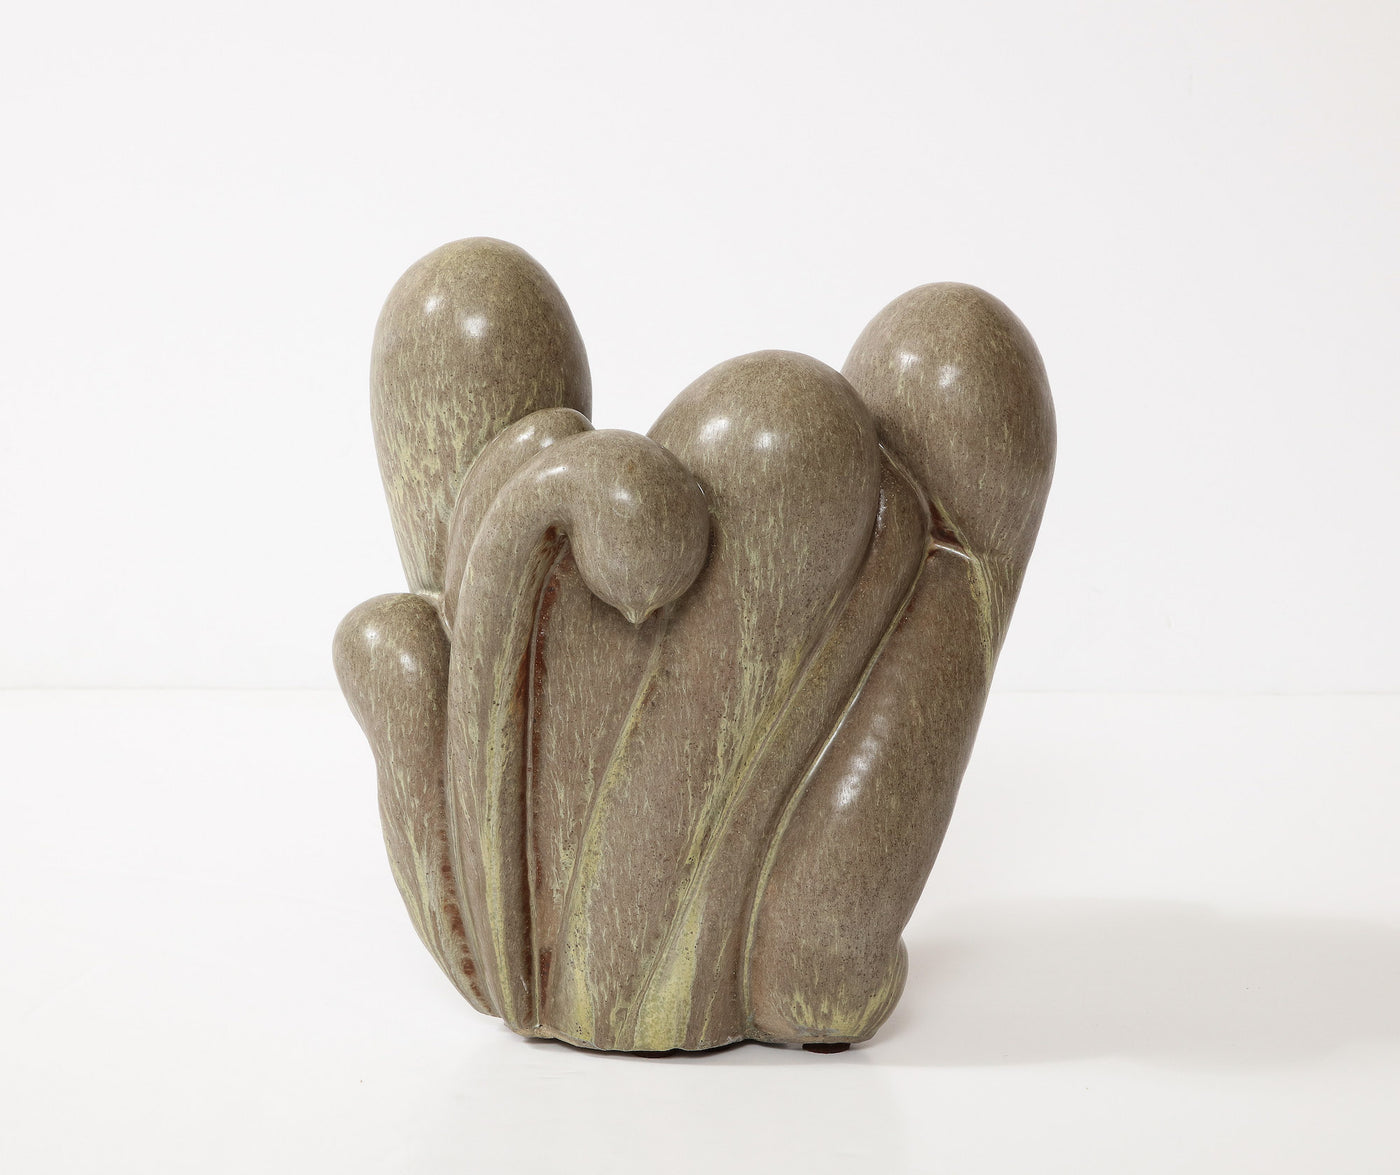 Untitled Sculpture #12, by Rosanne Sniderman